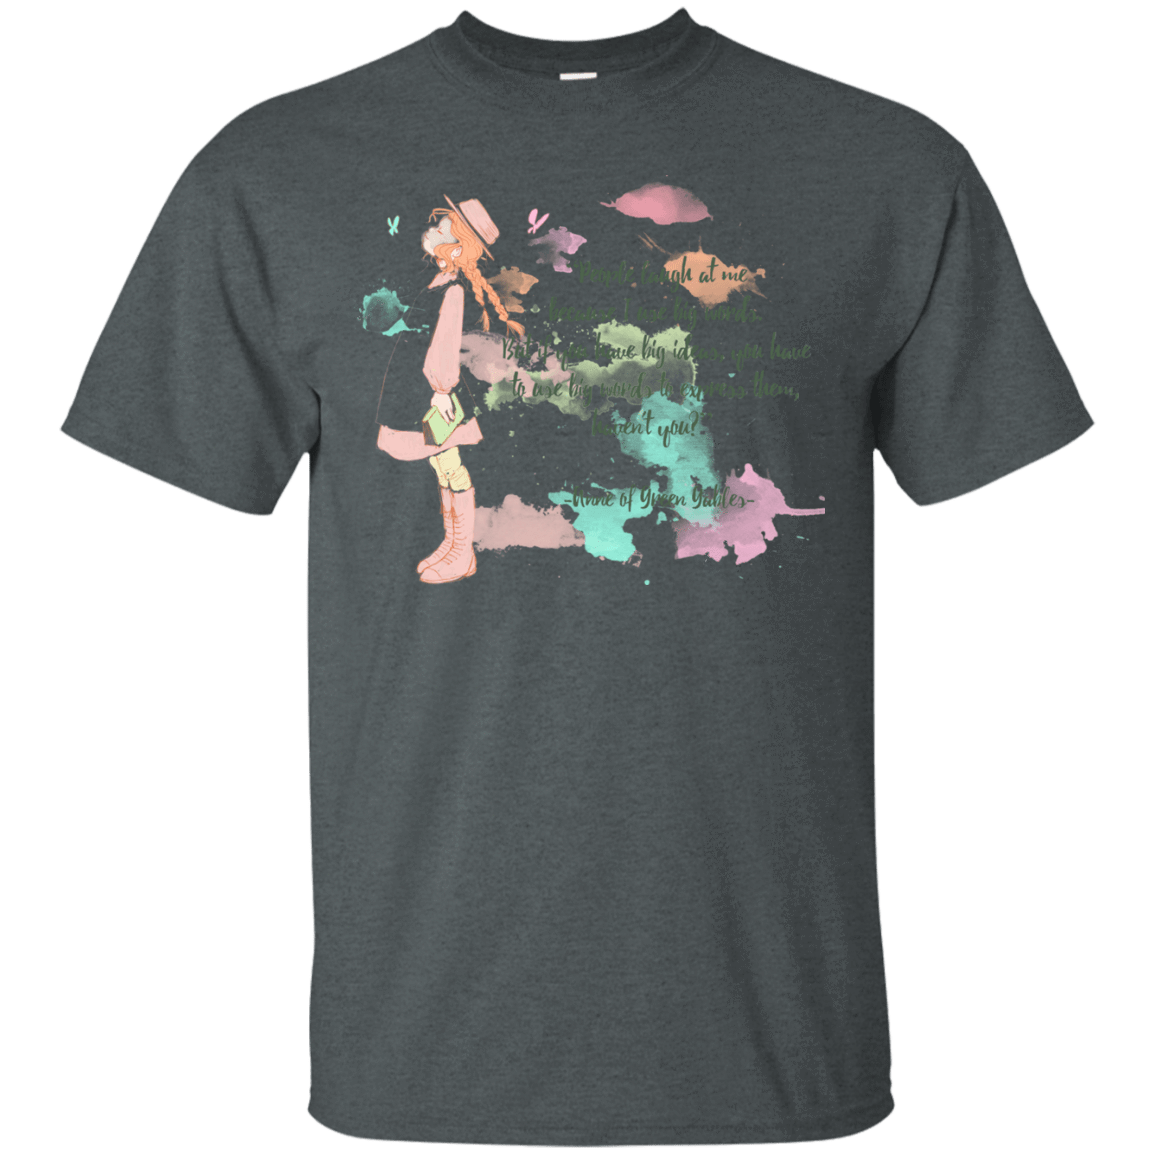 T-Shirts Dark Heather / Small Anne of Green Gables 3 T-Shirt